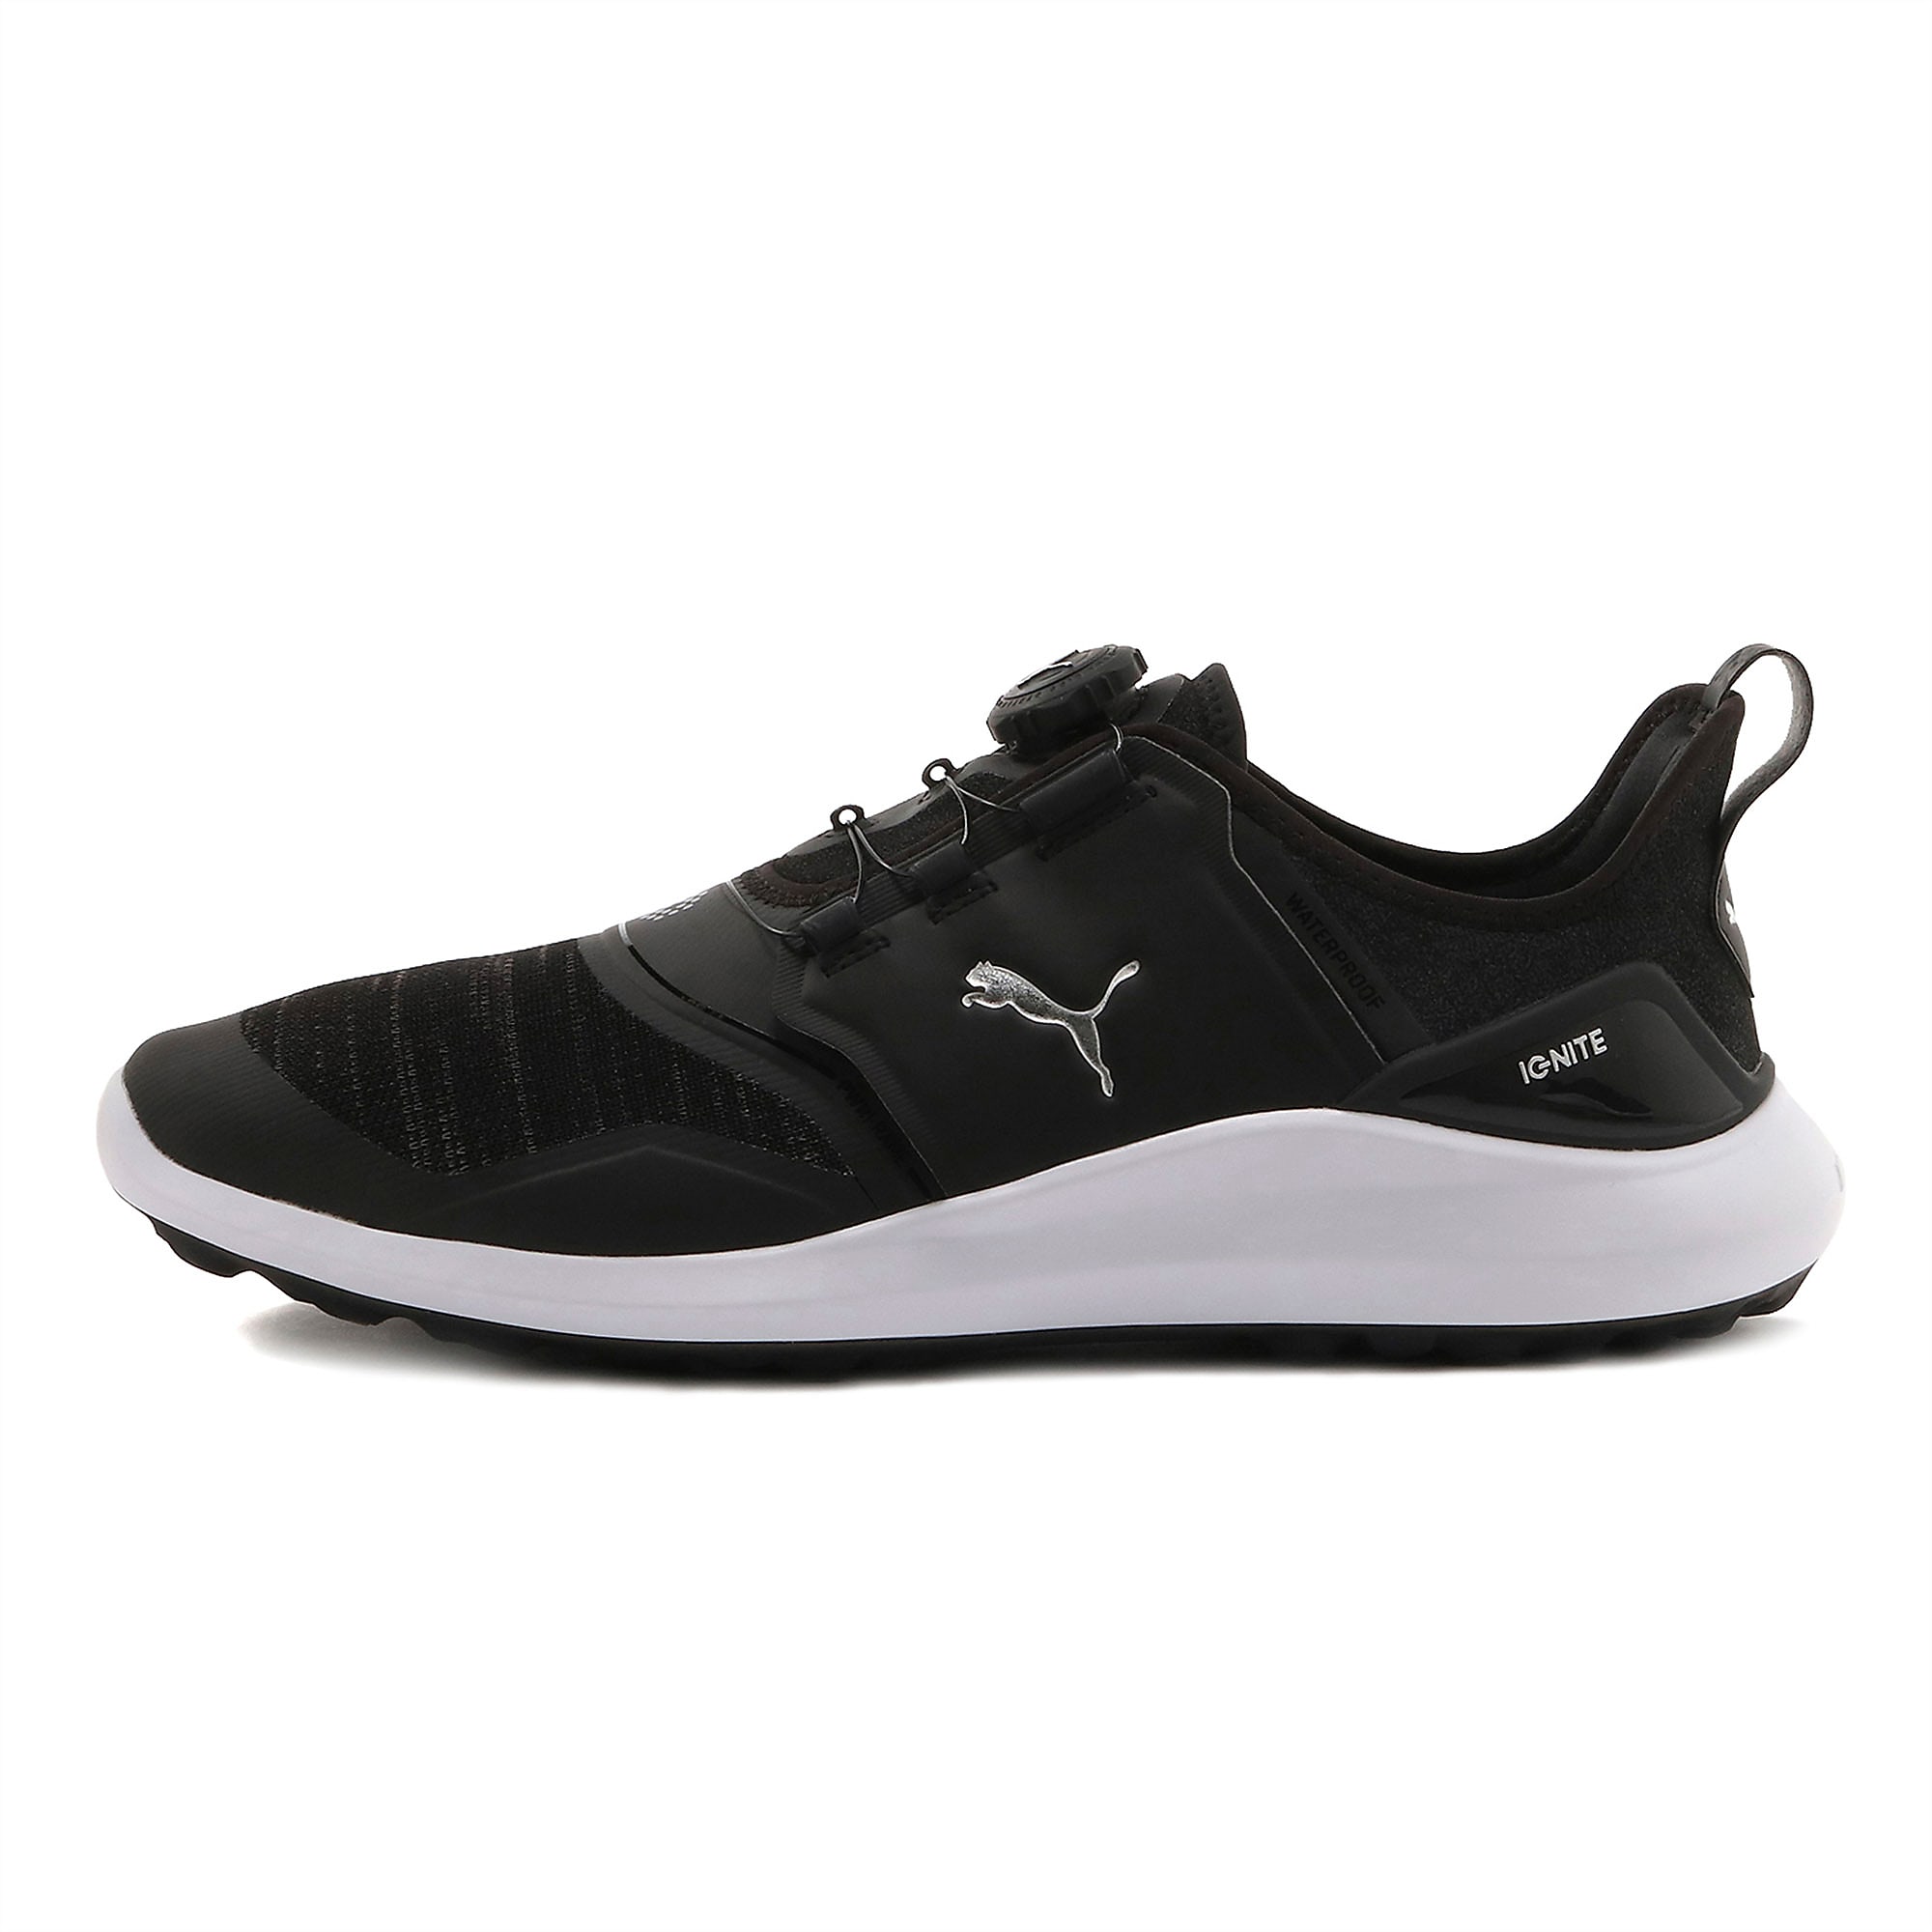 Where To Buy Puma Golf Shoes In Singapore? - Shoe Effect